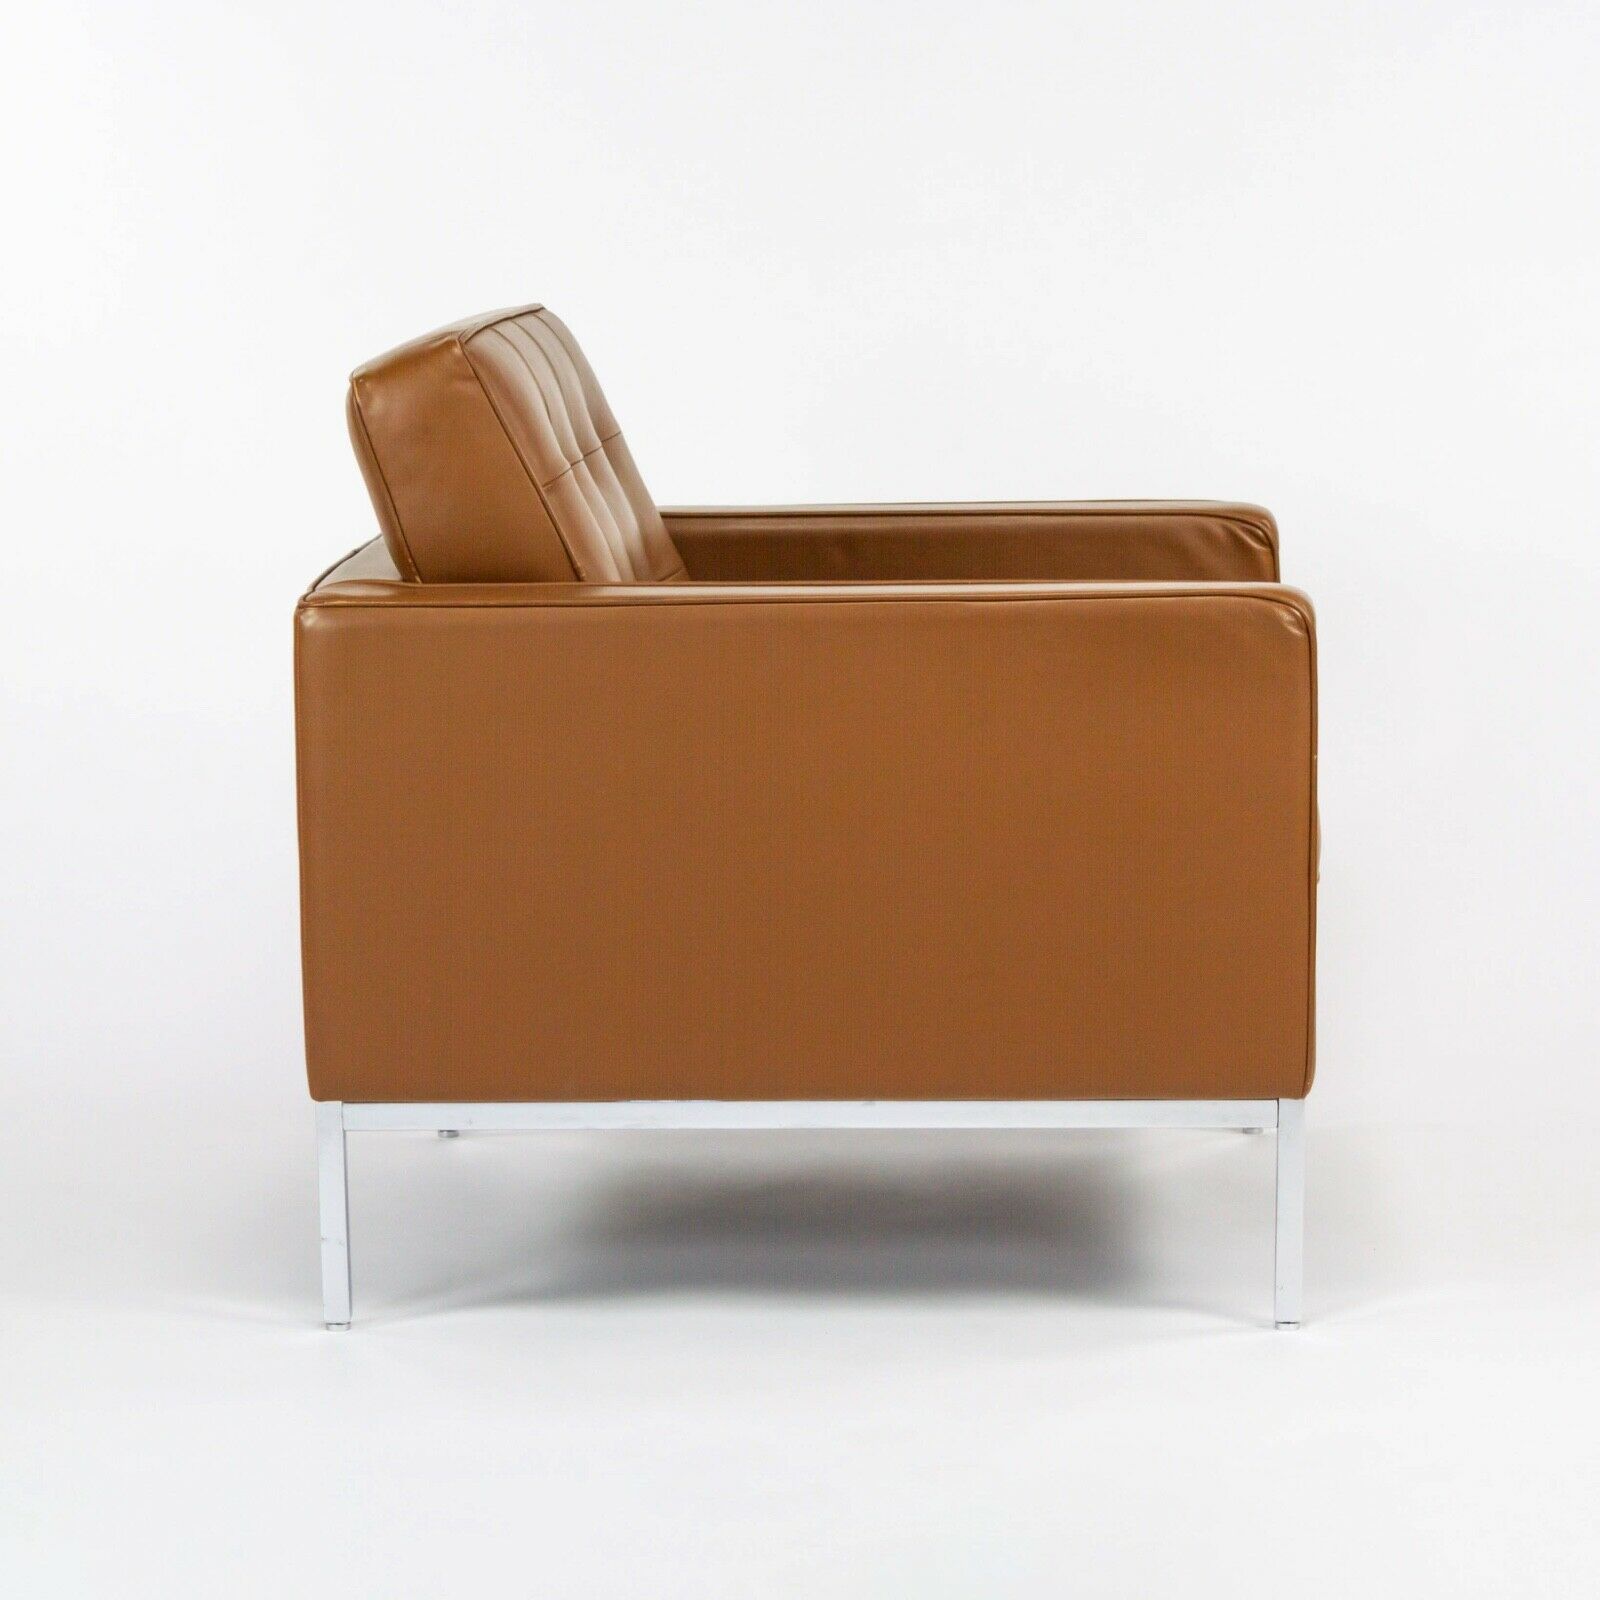 2012 Pair of Florence Knoll Club / Lounge Chairs in Dark Tan or Caramel Leather